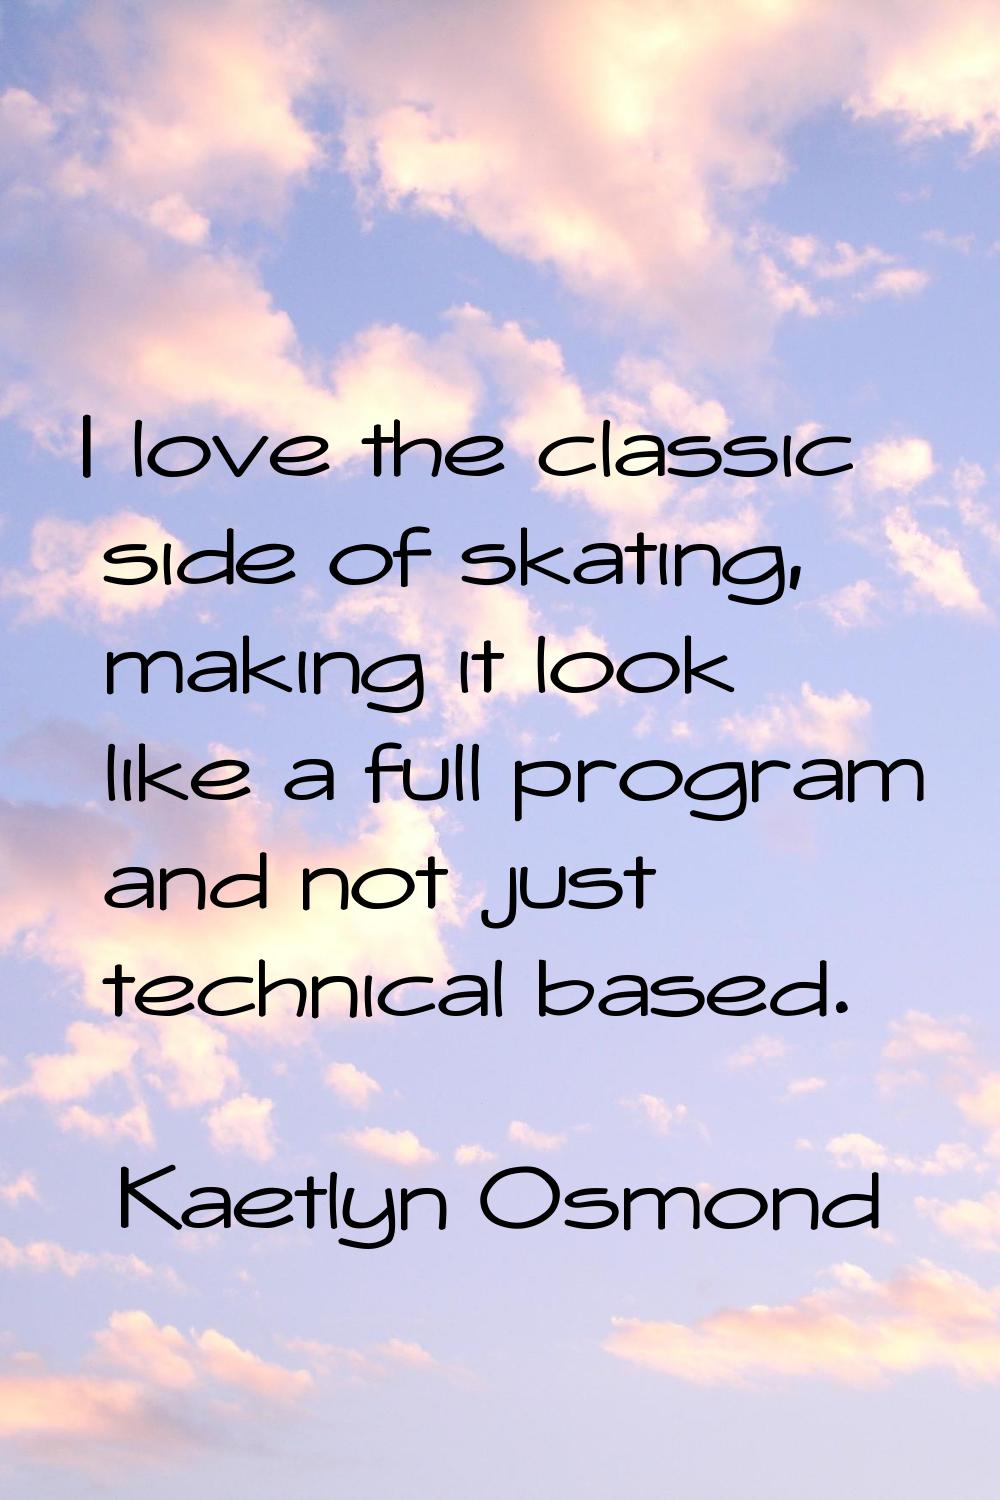 I love the classic side of skating, making it look like a full program and not just technical based